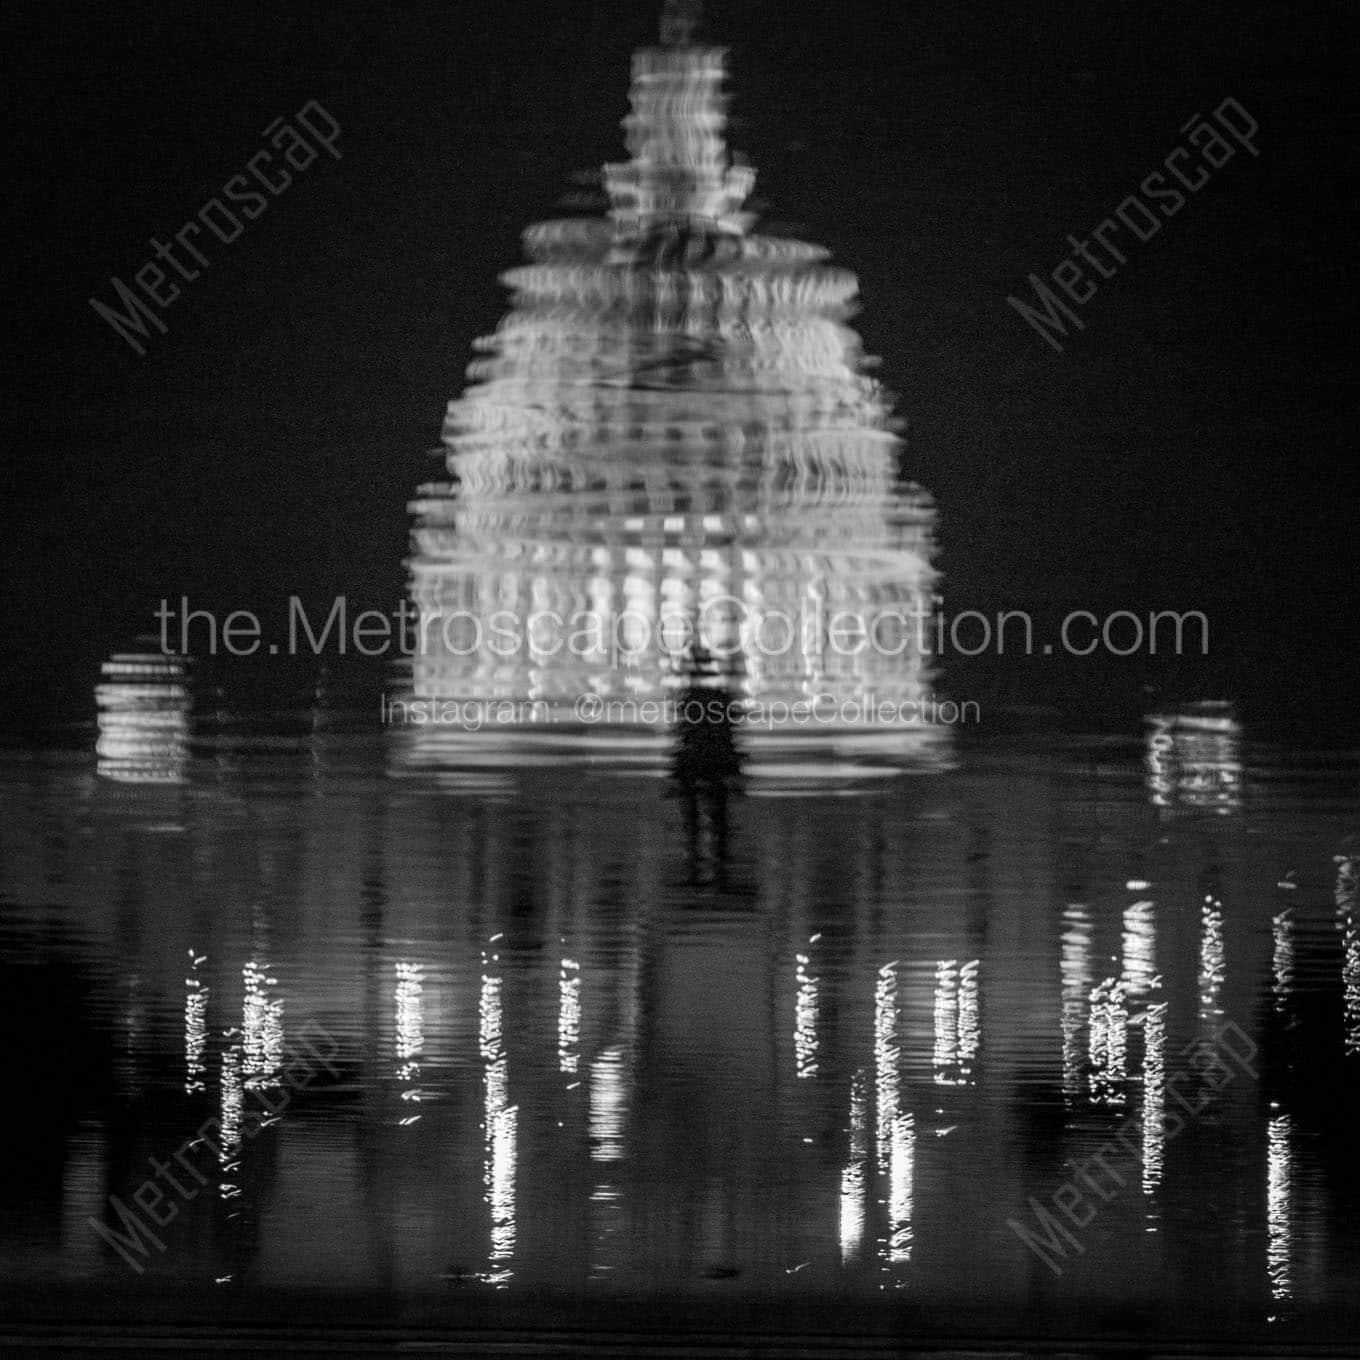 reflection of us capitol dome Black & White Wall Art